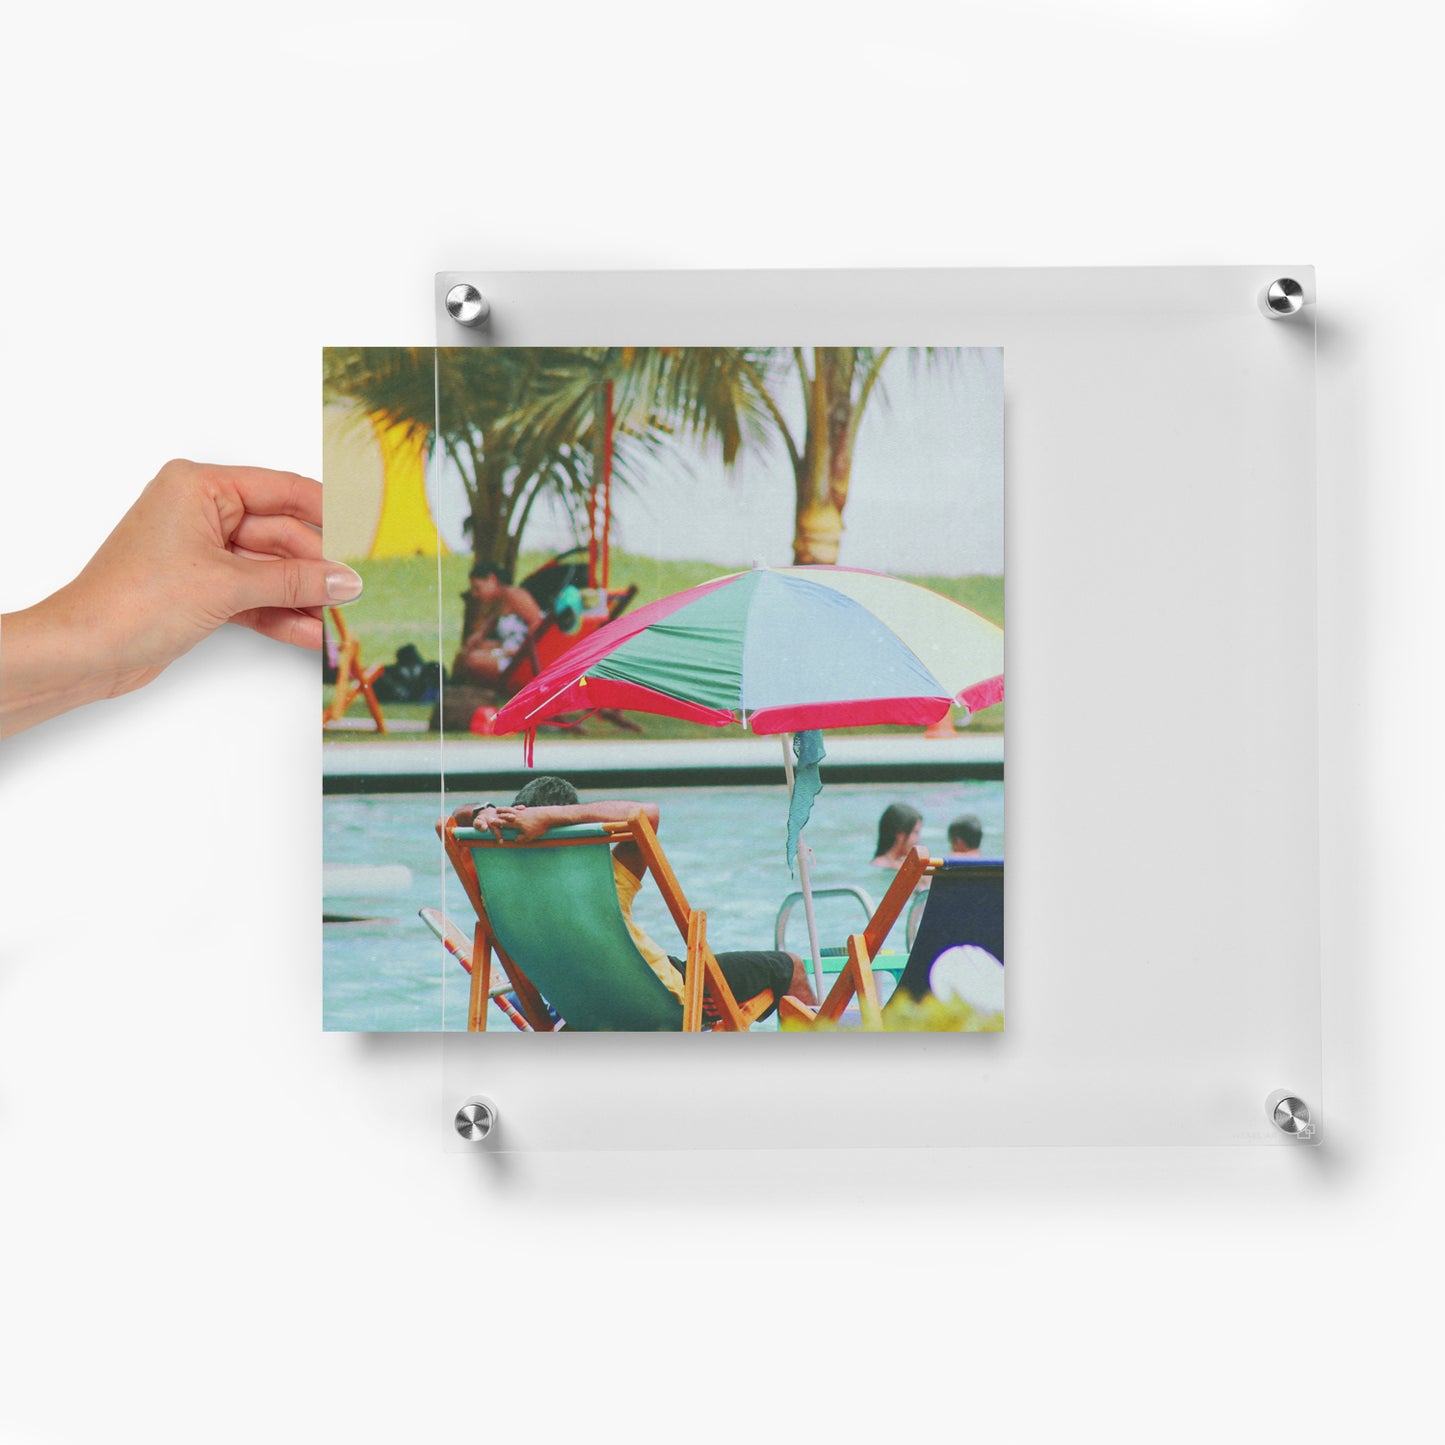 14" x 14" Easy Change Acrylic Float Frame + Magnets for 12" x 12" Art